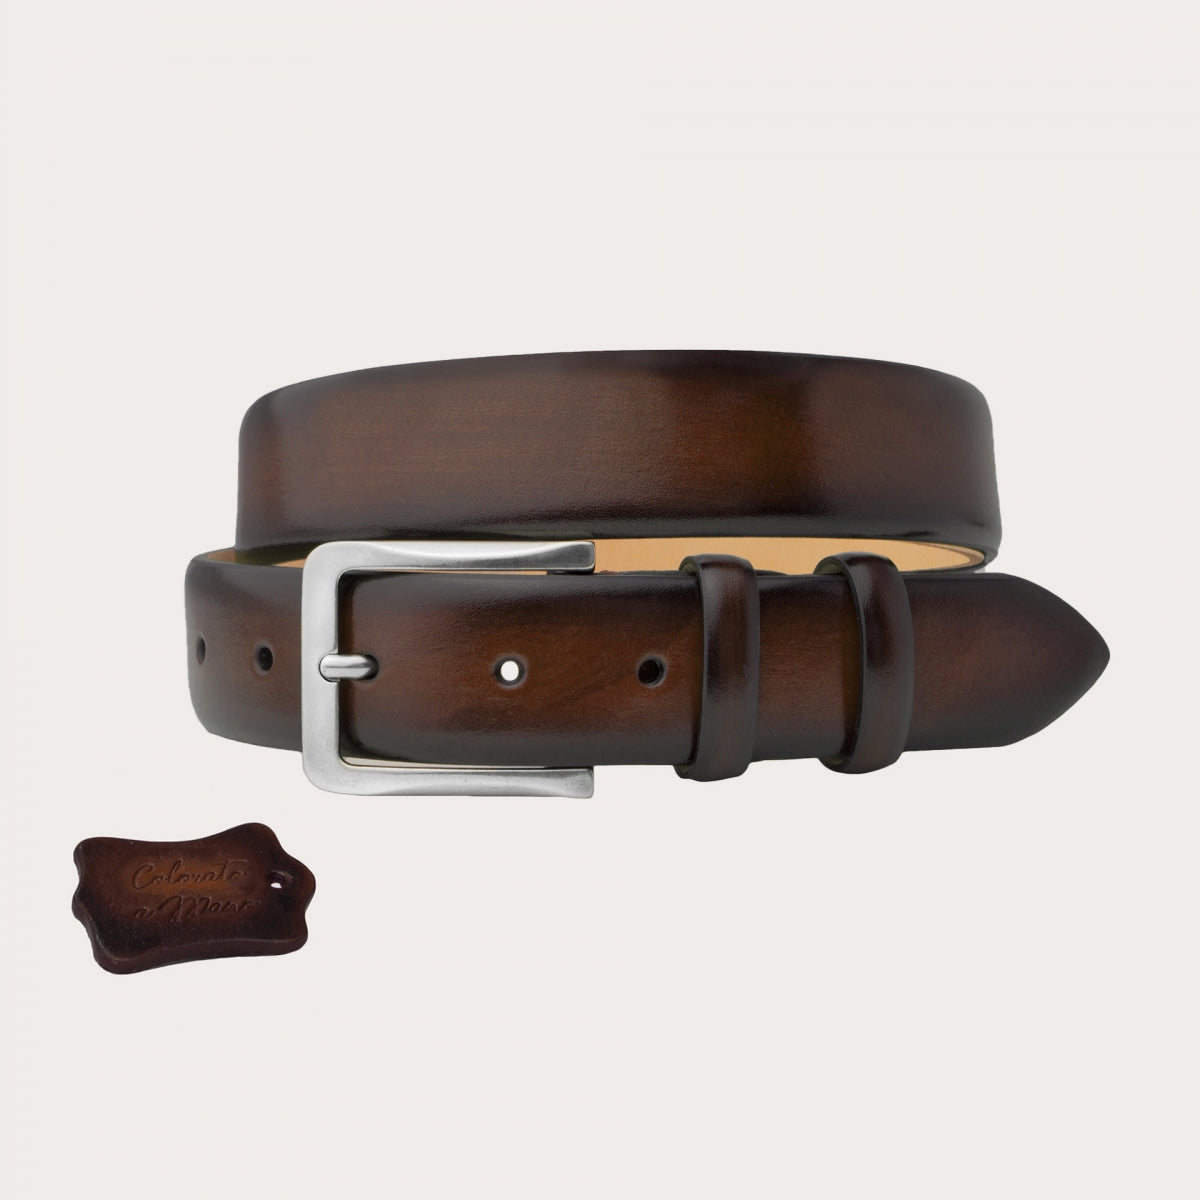 Hand-colored and hand-shaded leather Patina brown belt